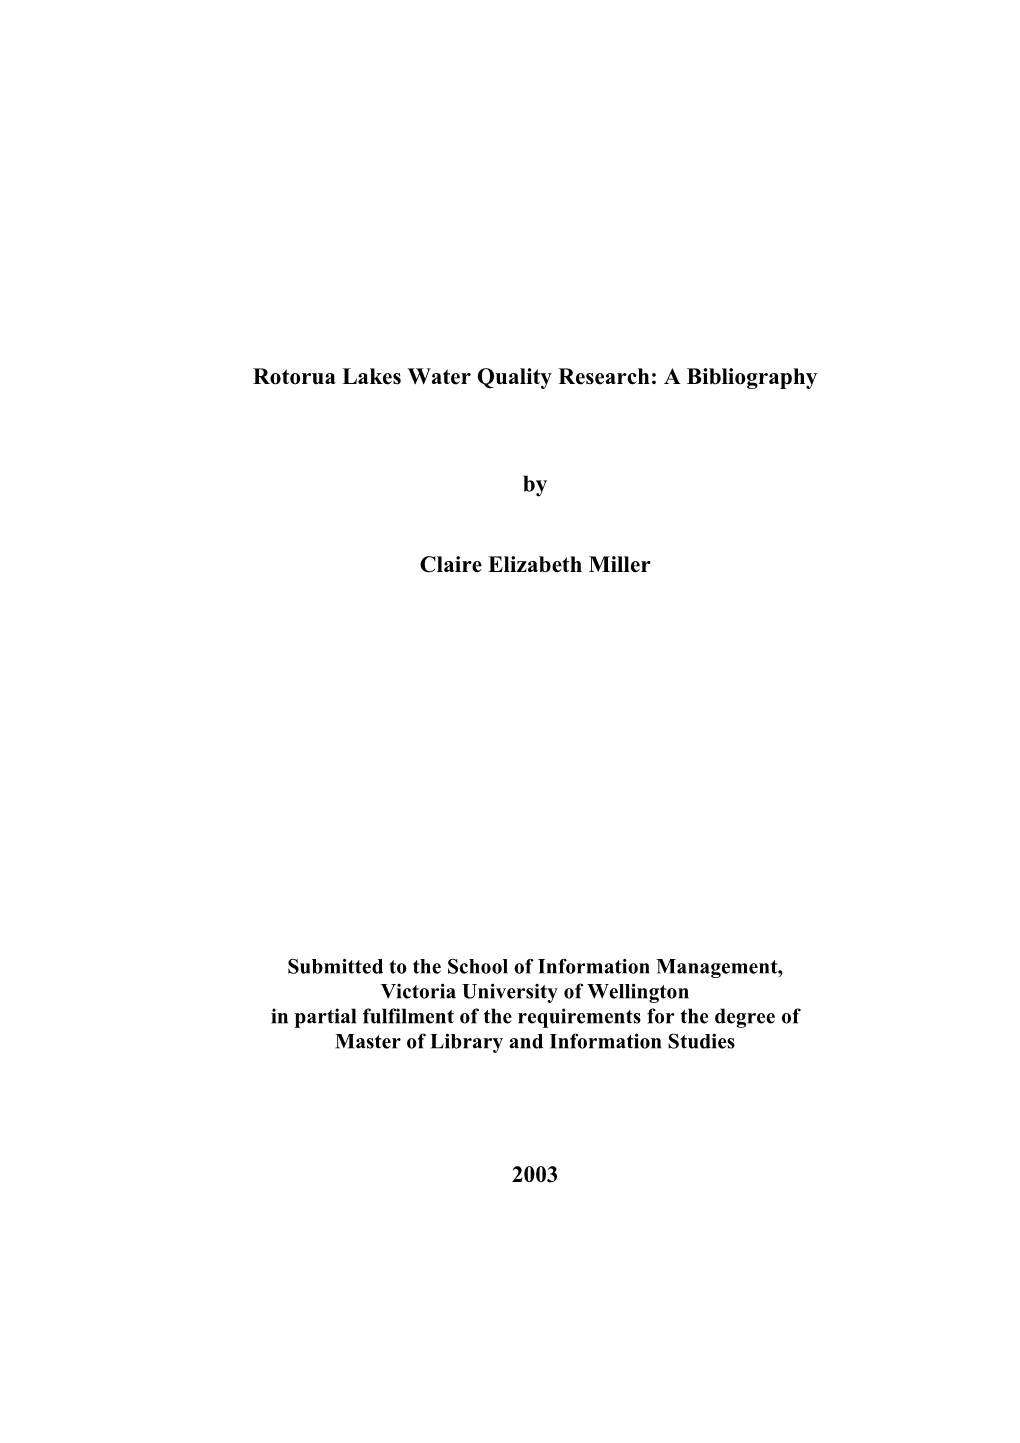 Rotorua Lakes Water Quality Research: a Bibliography by Claire